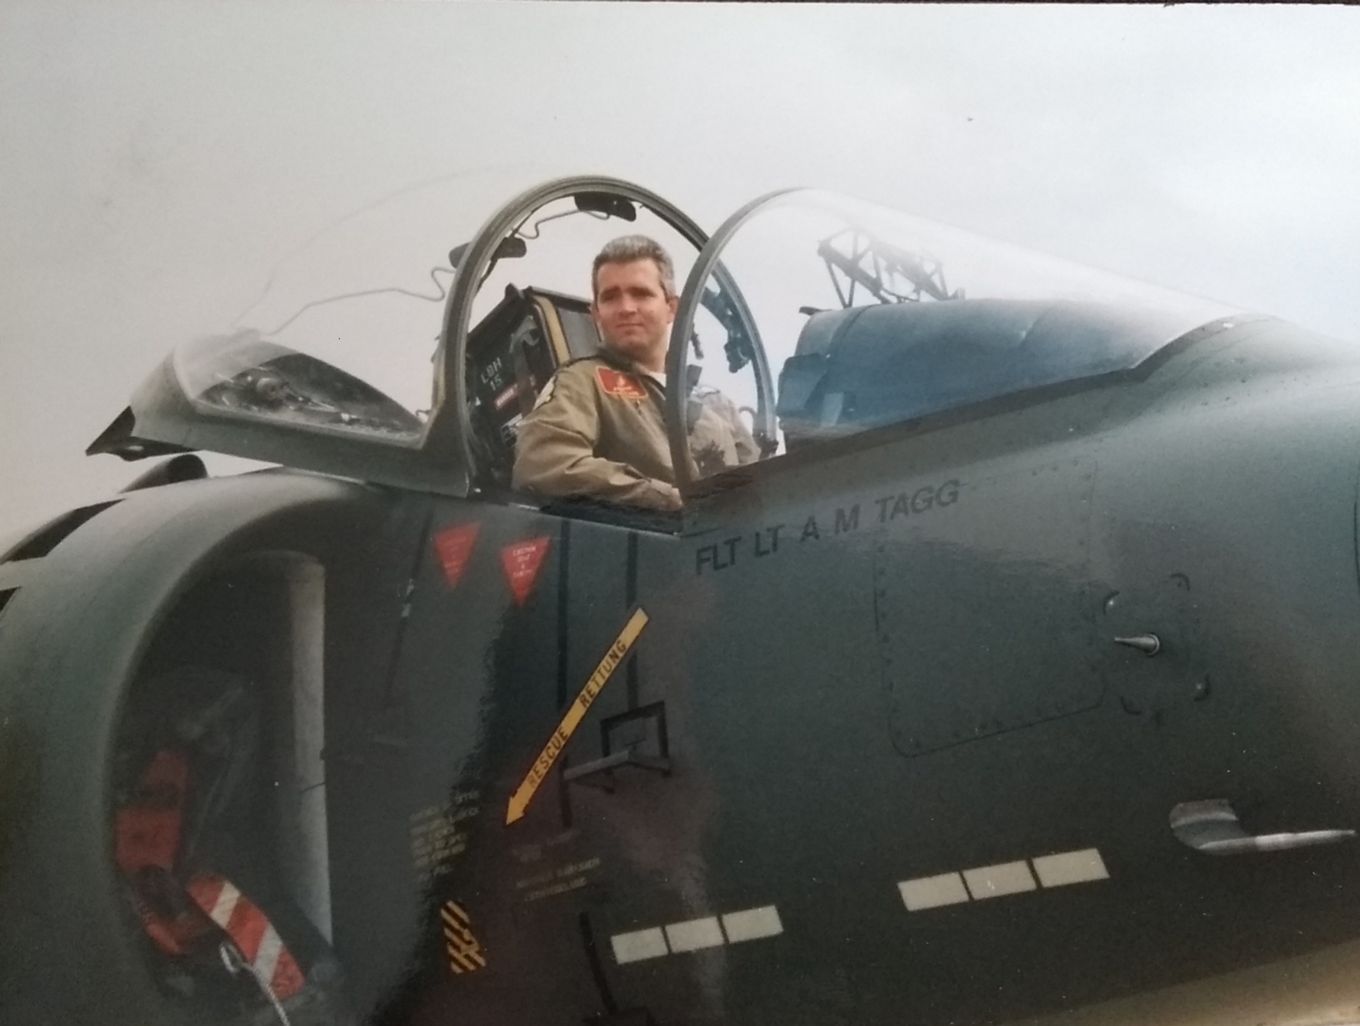 Flight Lieutenant Andy Tagg at the controls of a Harrier GR7 in 1994